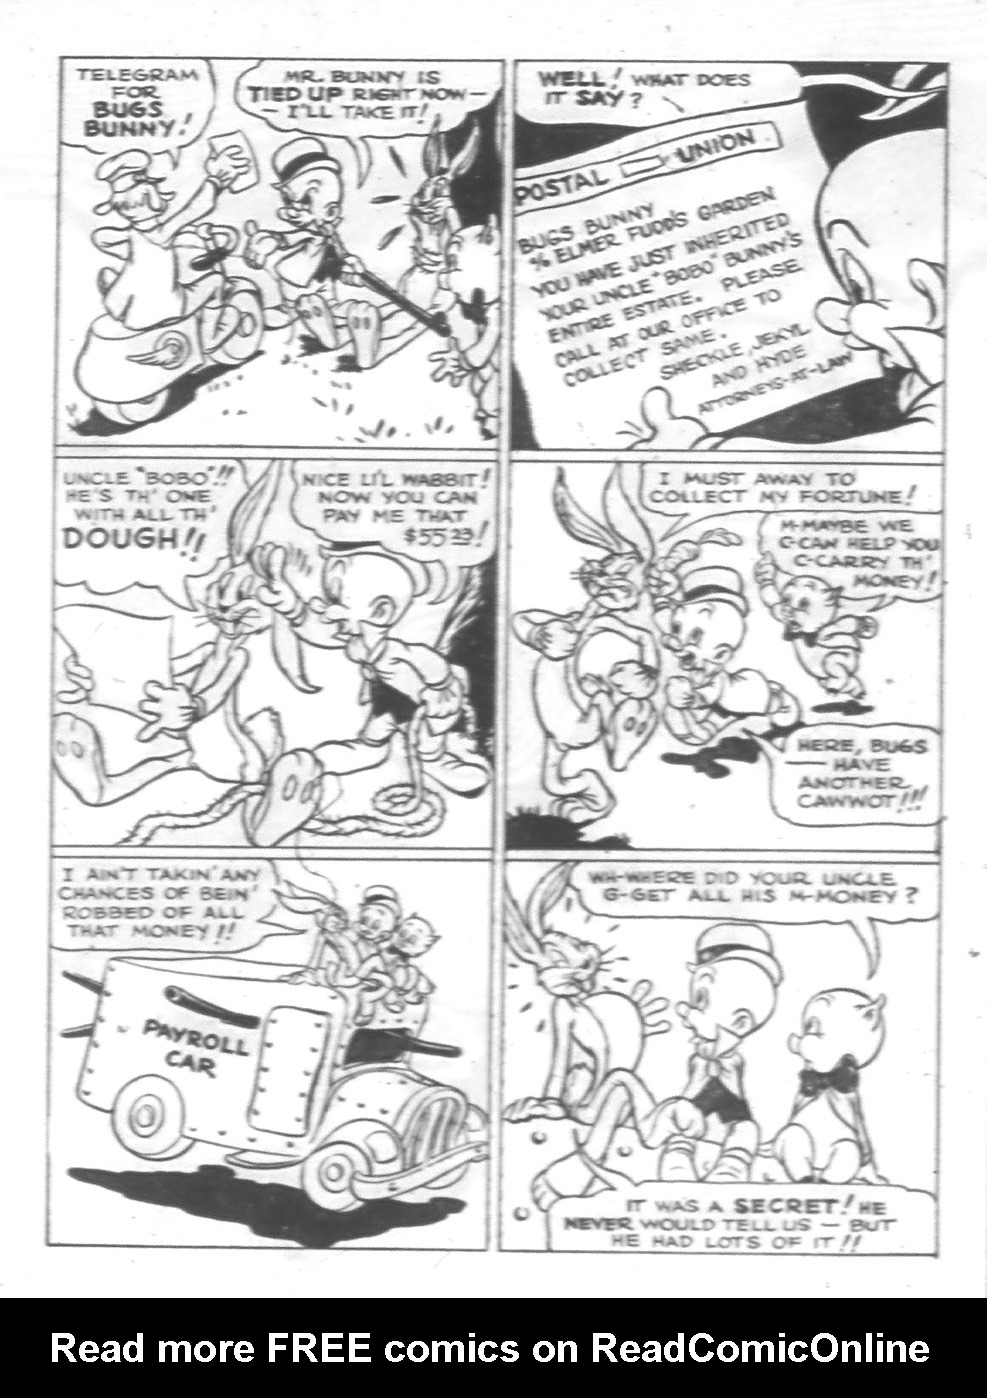 Read online Bugs Bunny comic -  Issue #8 - 30